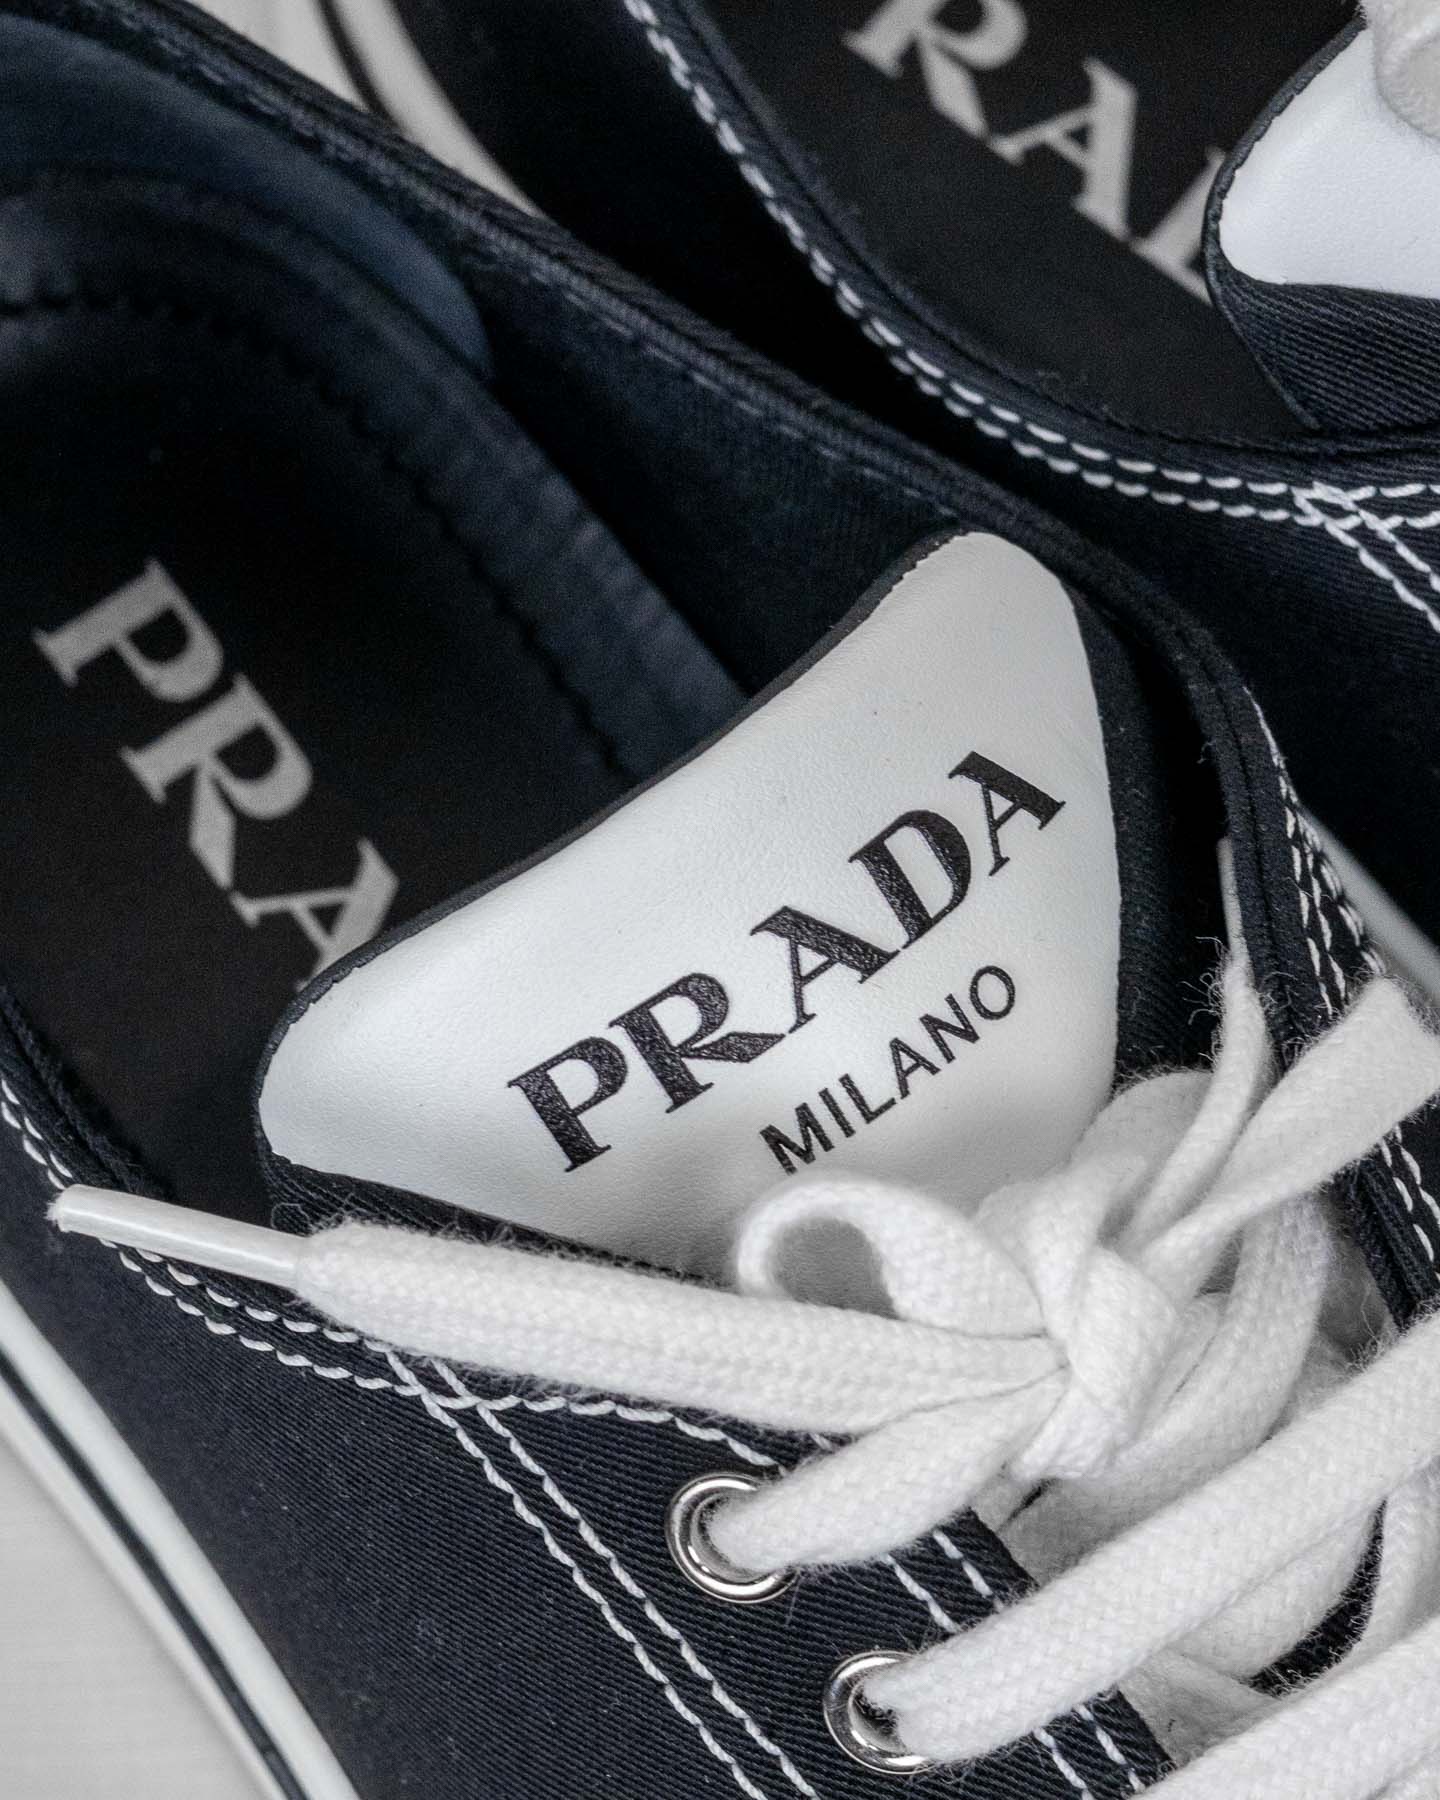 Prada Canvas Sneakers In Black And White- Size 37